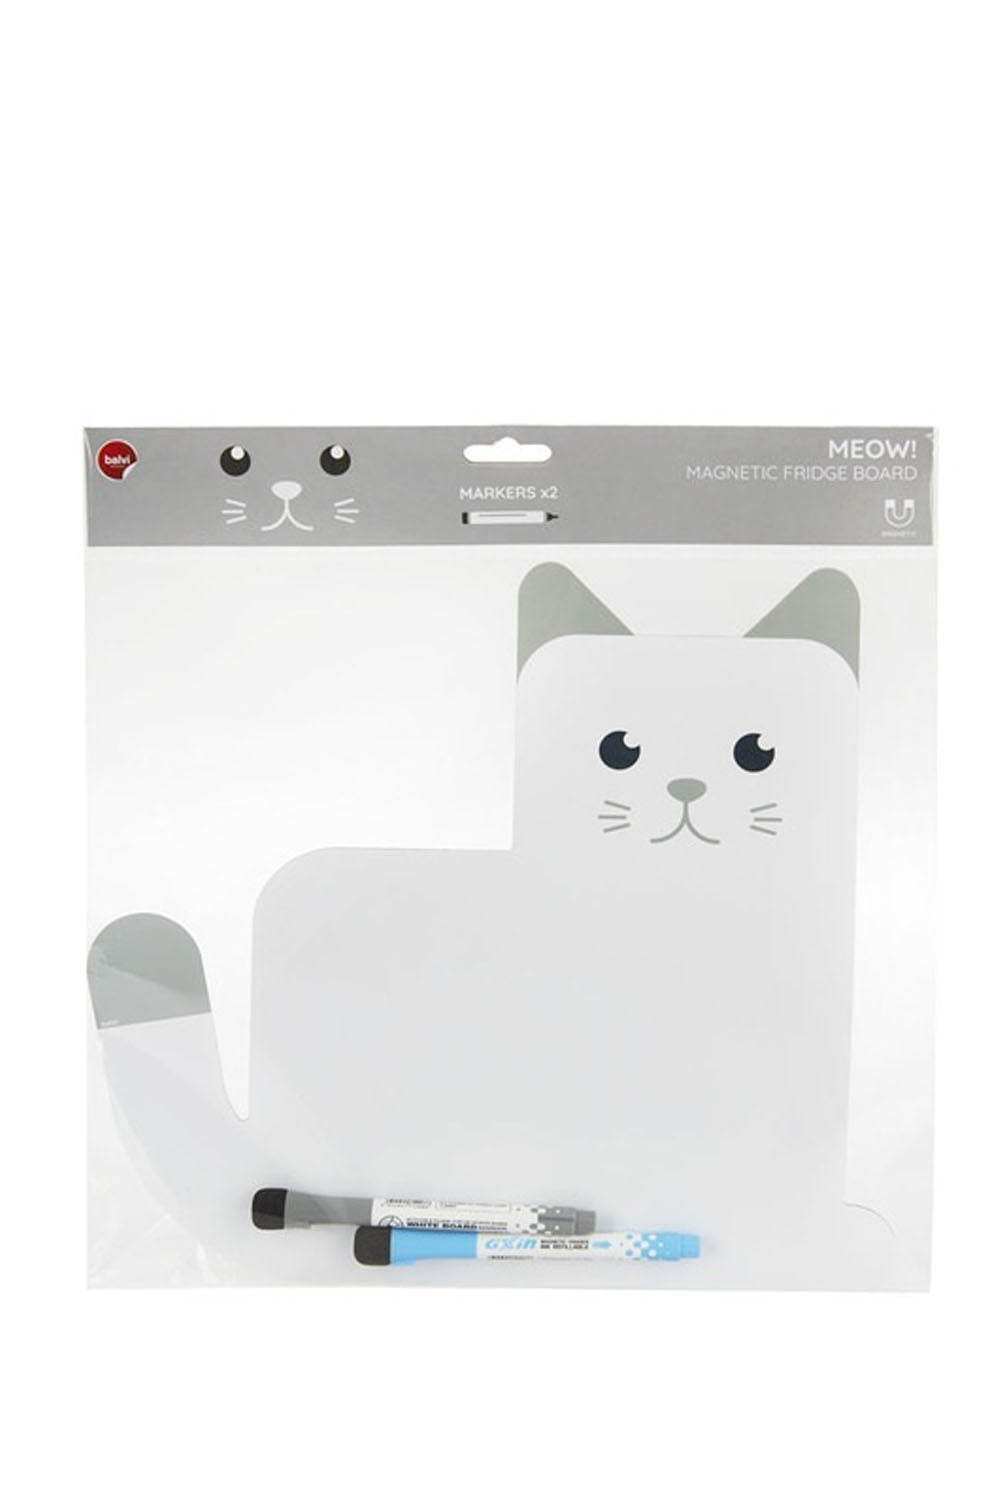 Meow! Magnetic Fridge Board With 2 Markers